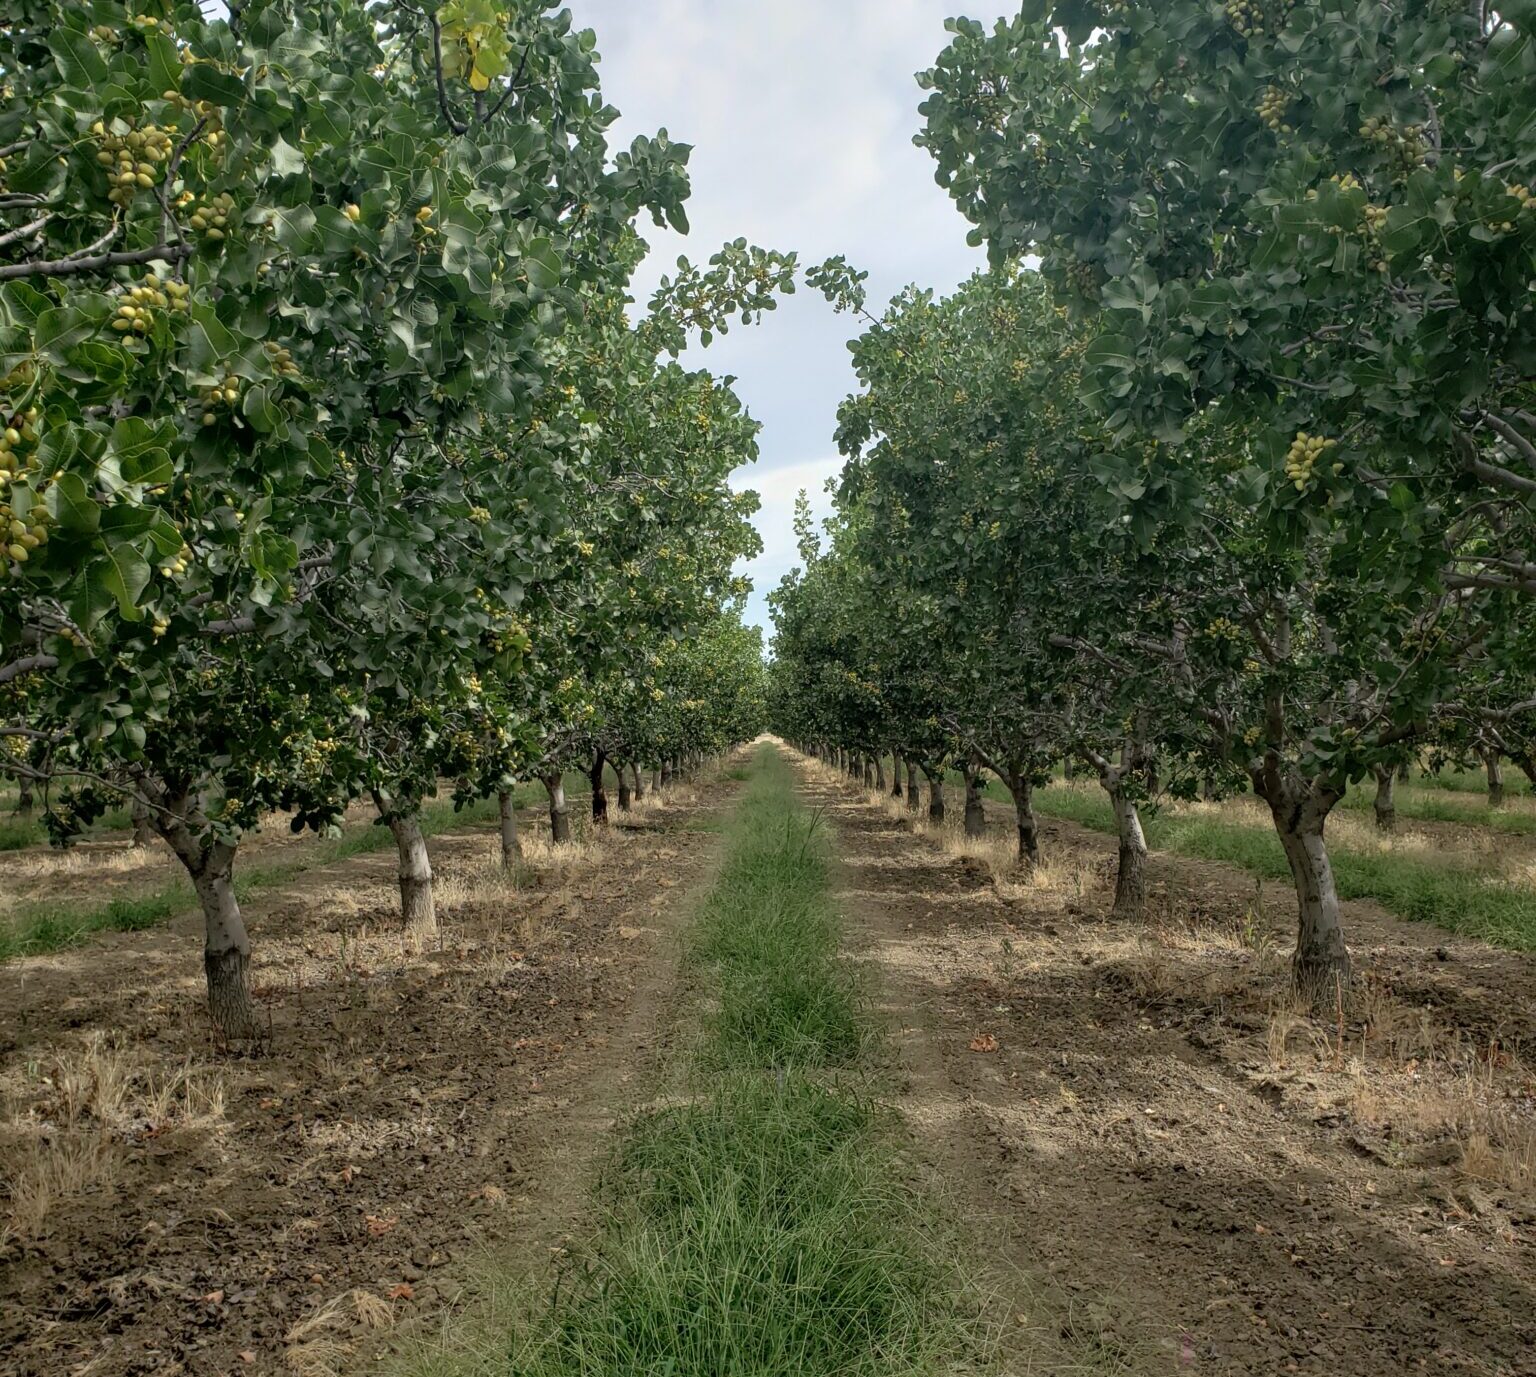 Water Budgeting and Management for Pistachio in a Drought Year: What are the Options?